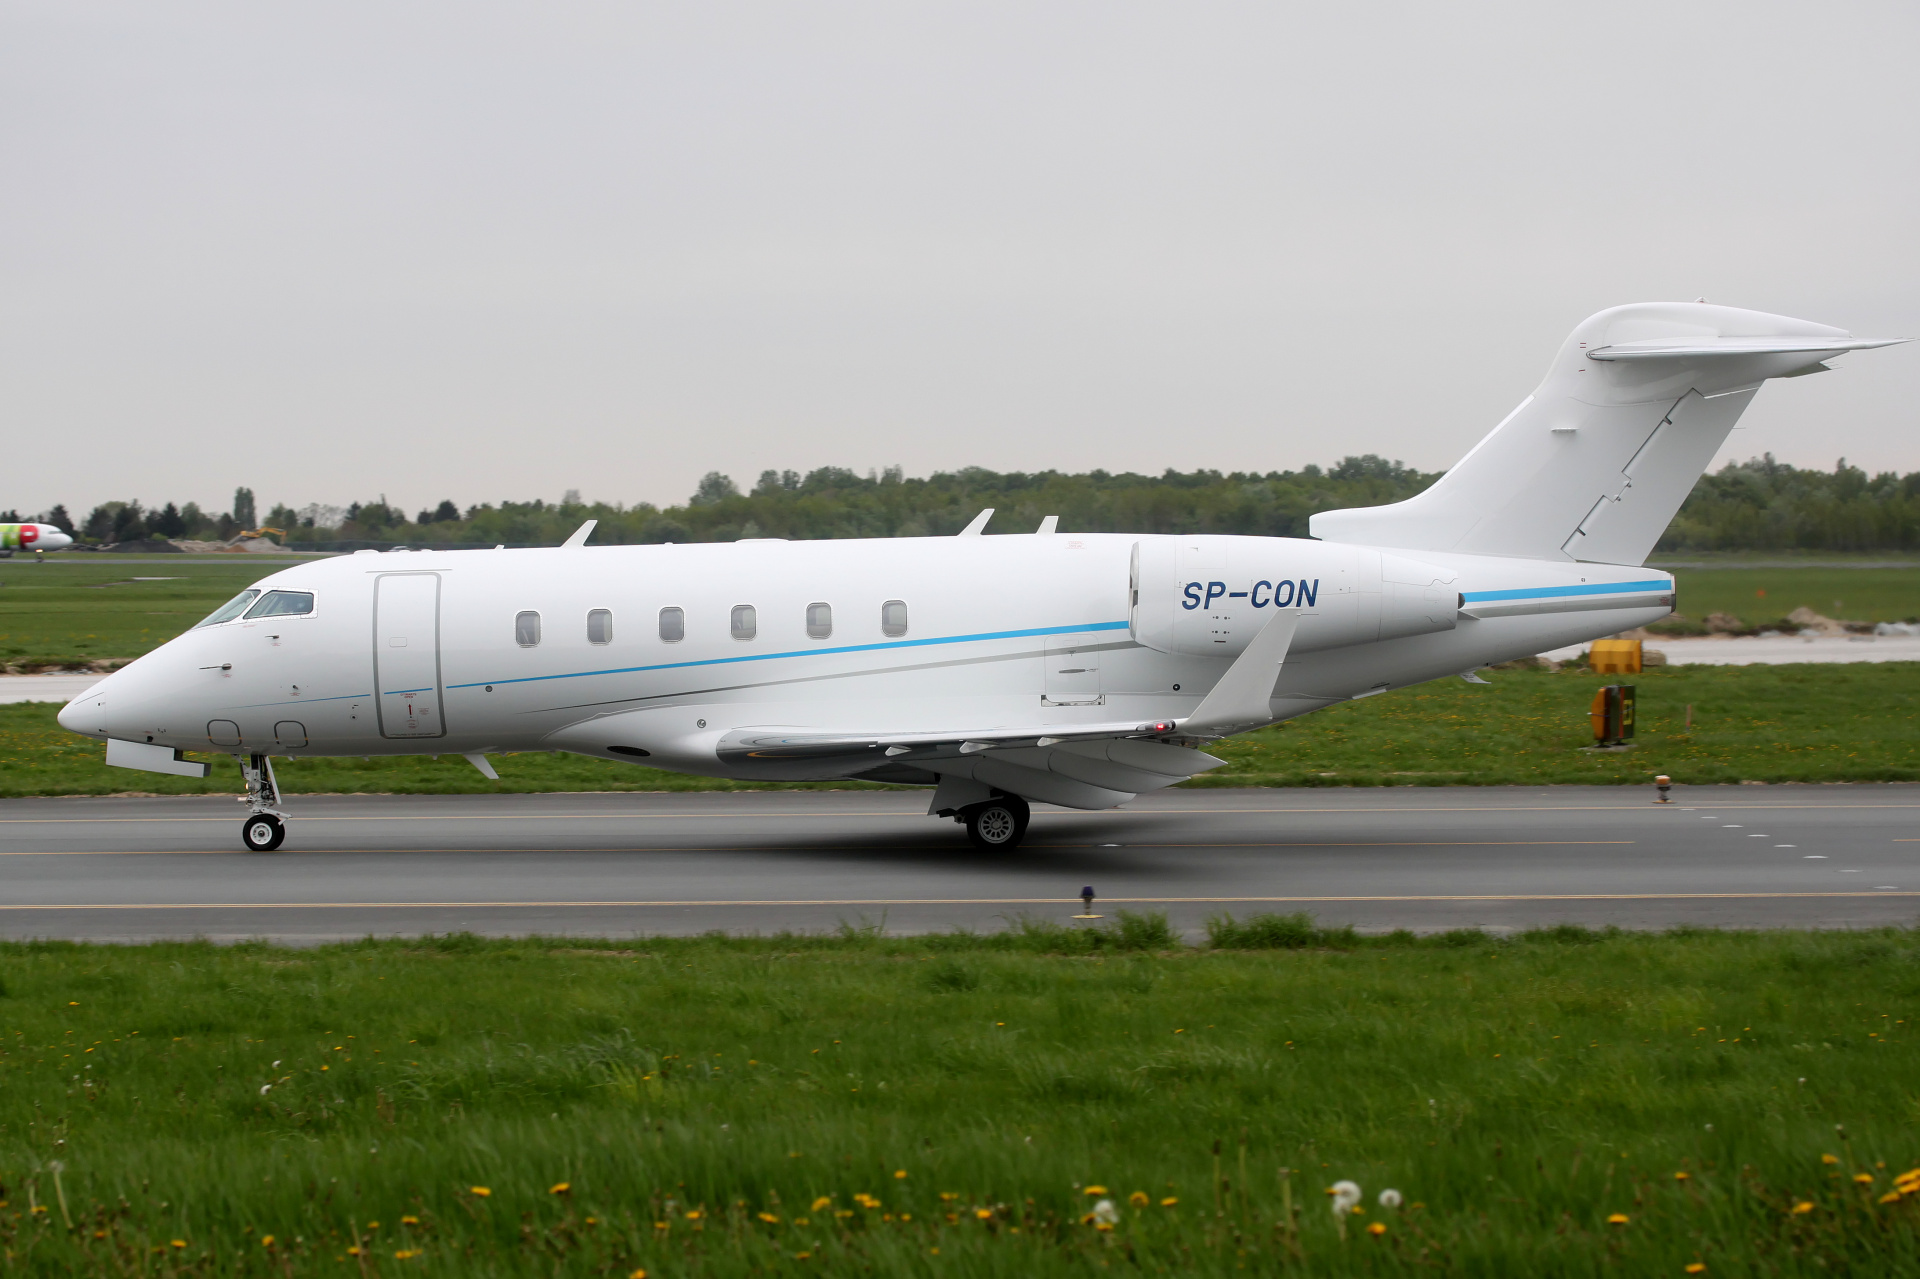 SP-CON, Jet Story (Aircraft » EPWA Spotting » Bombardier BD-100 Challenger 300)